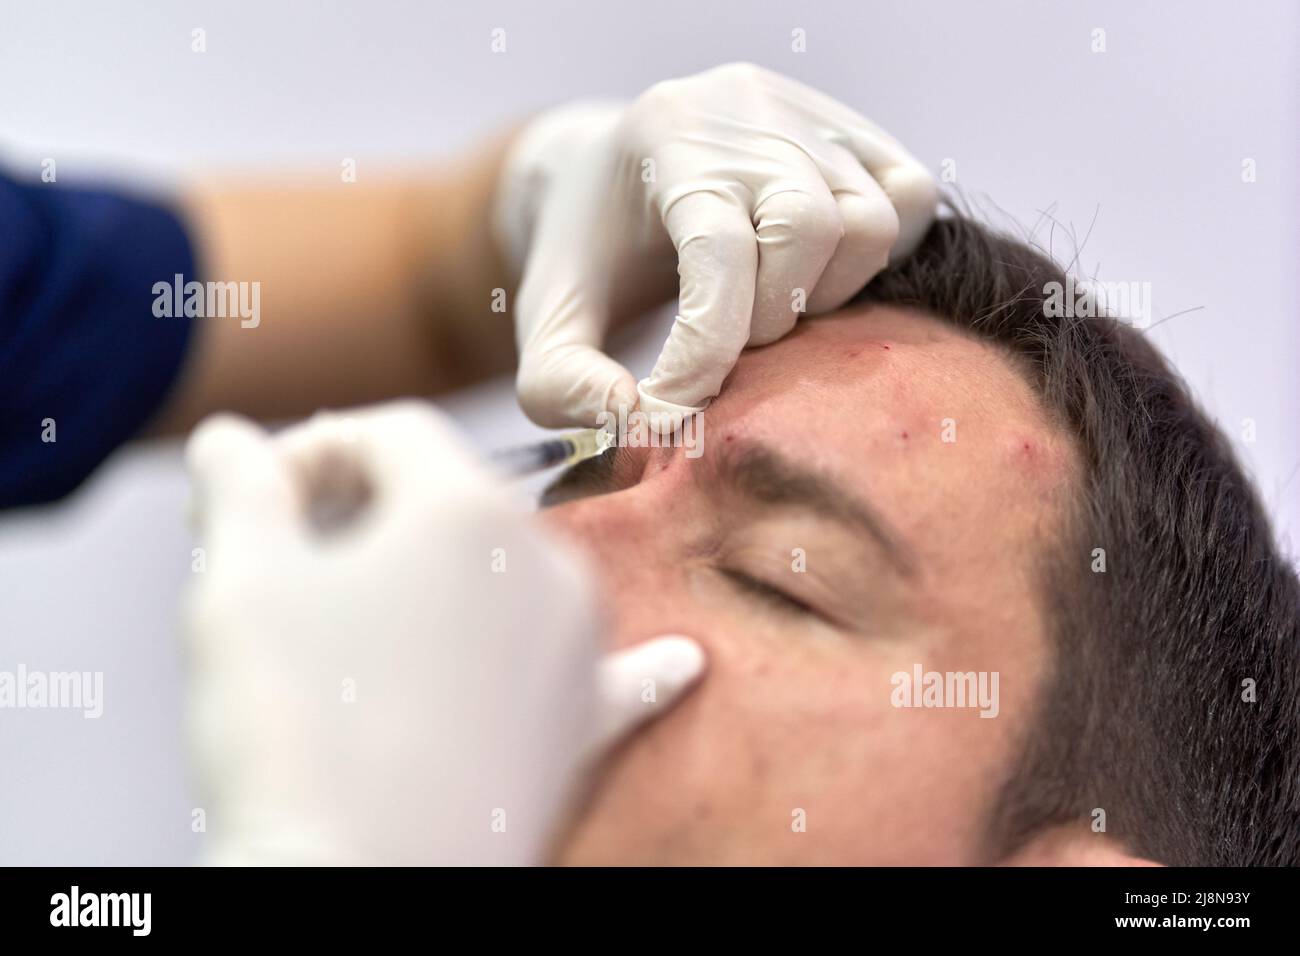 Doctor pinching a piece of skin where he injects botox to a patient Stock Photo